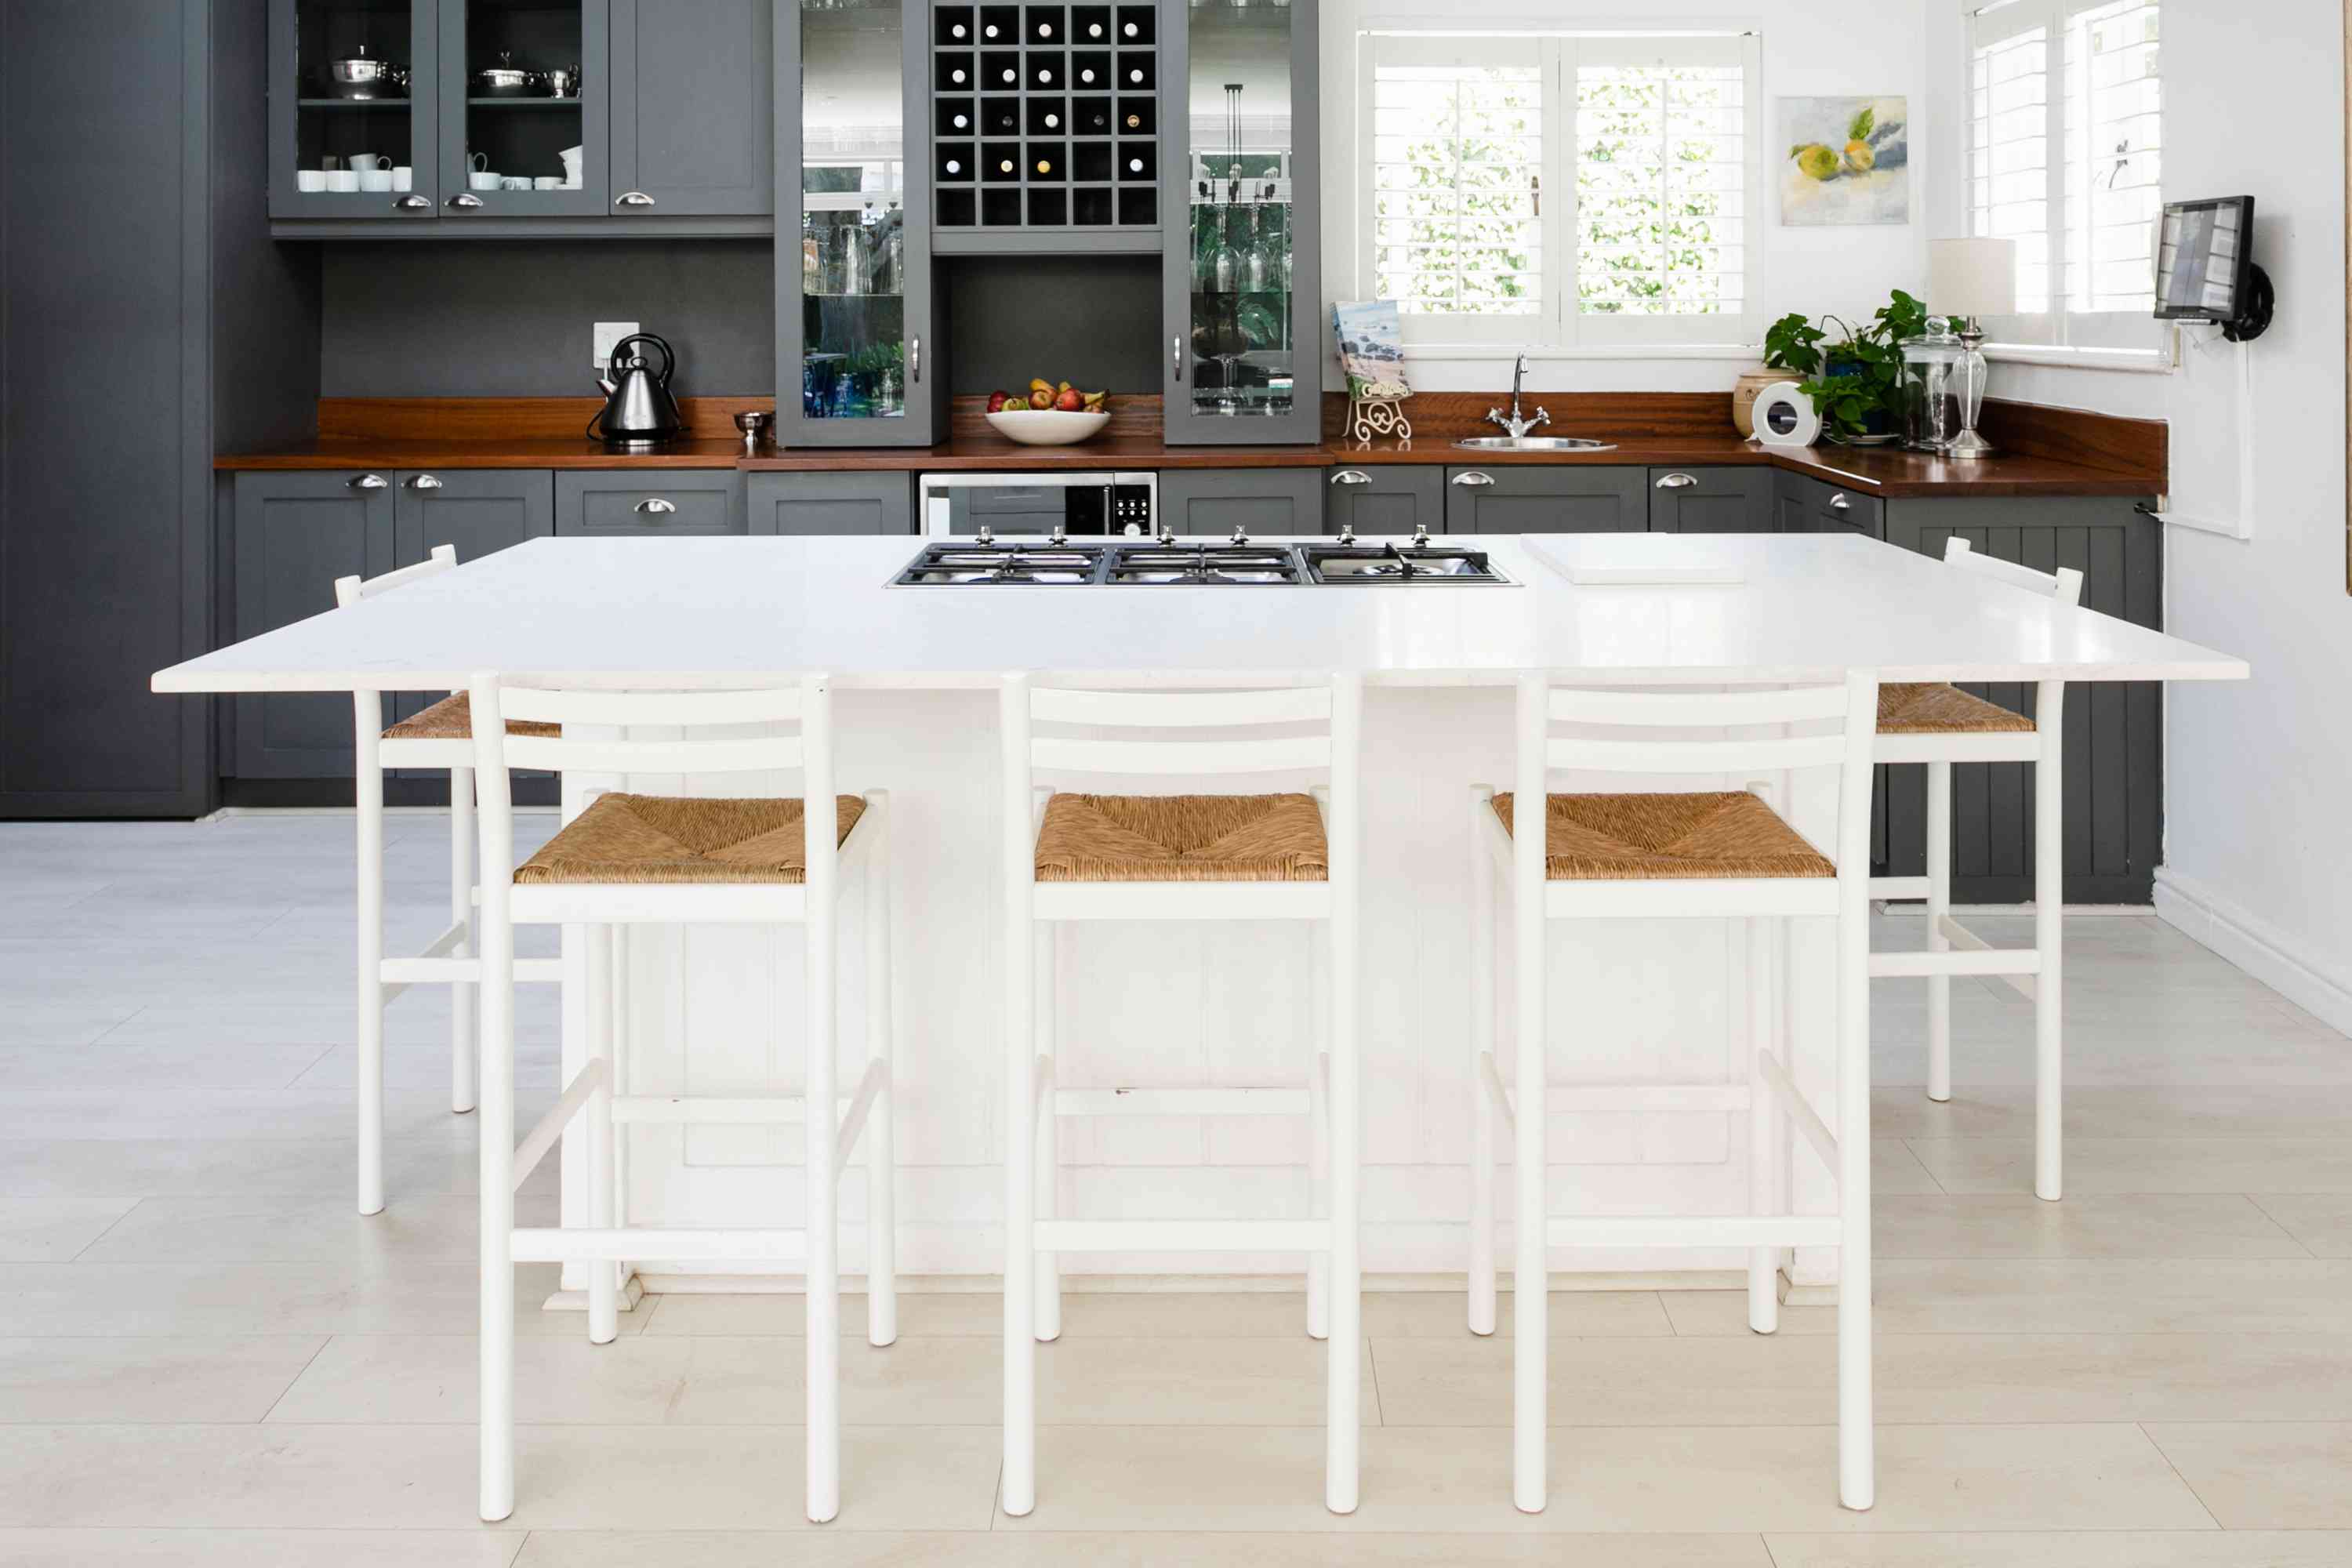 How to choose the right kitchen island size – create the perfect fit